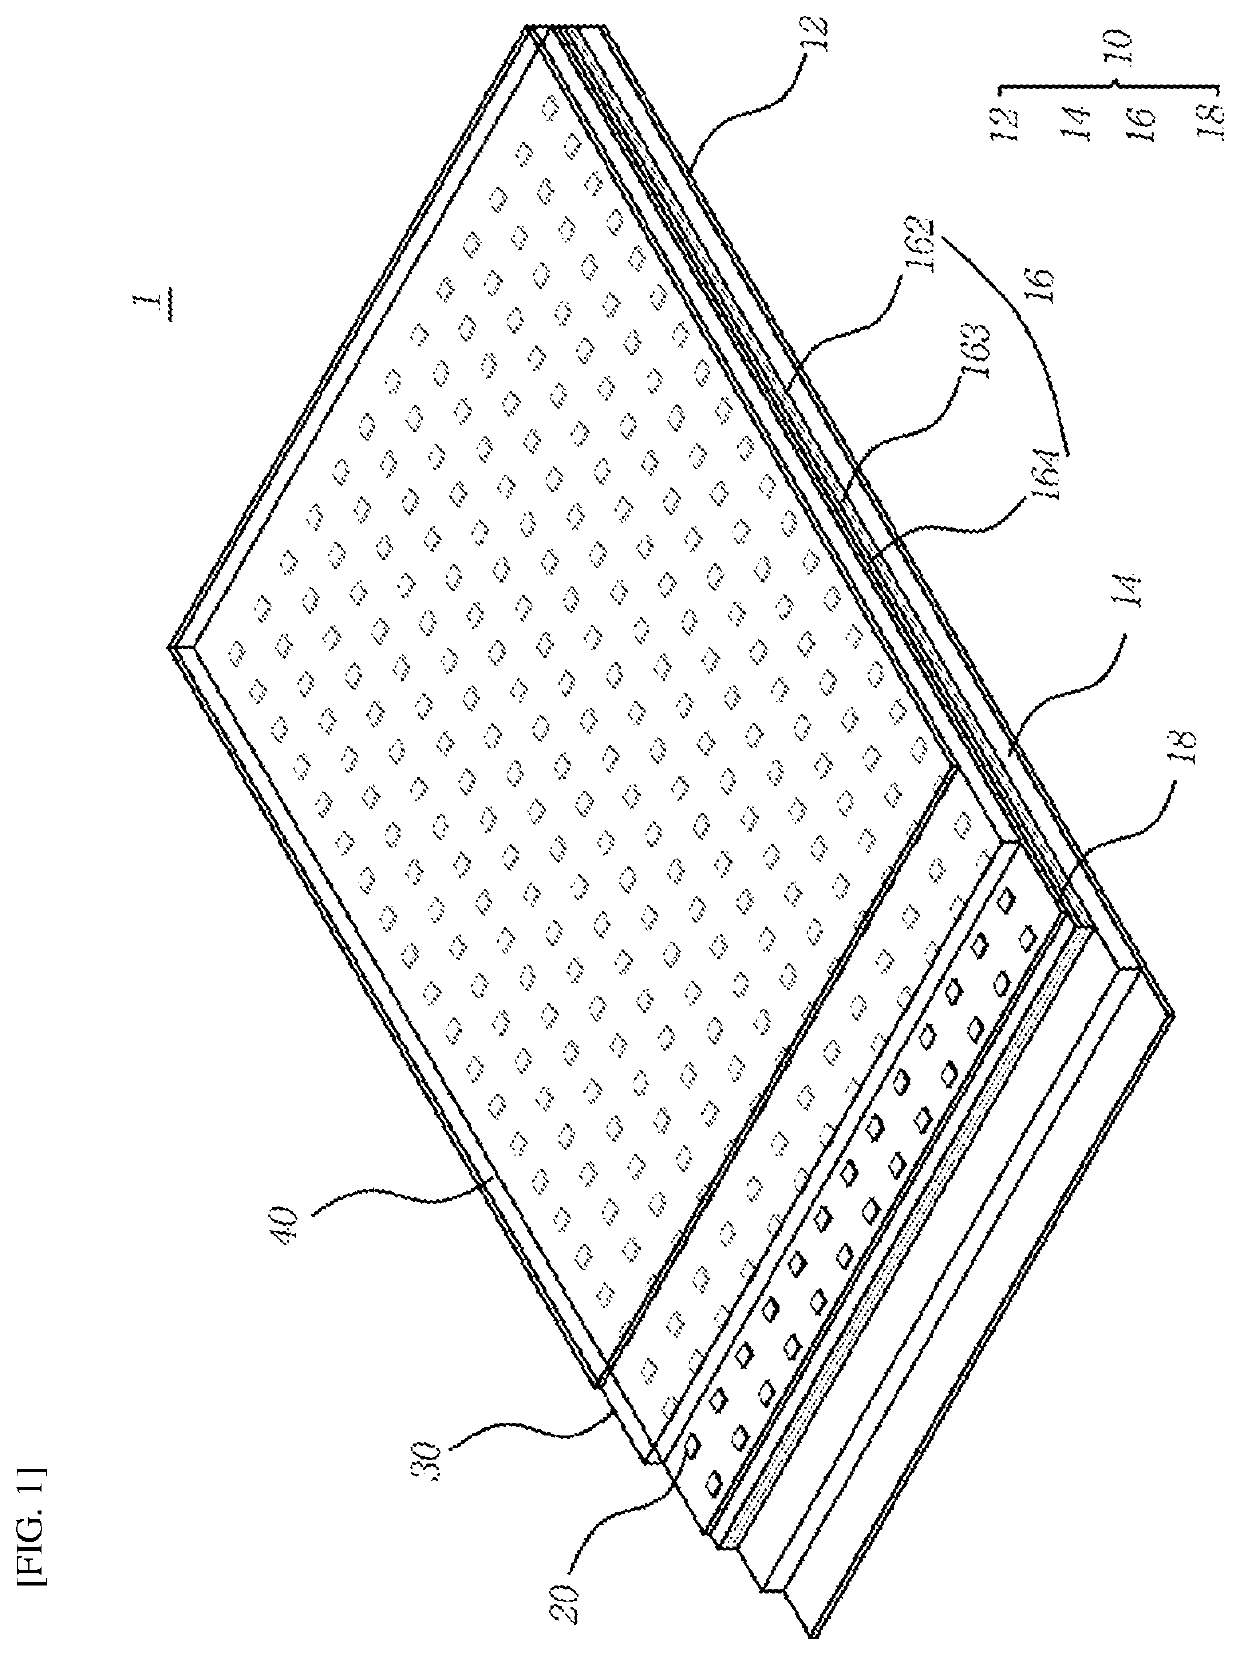 Flexible lighiing device and display panel using micro LED chips